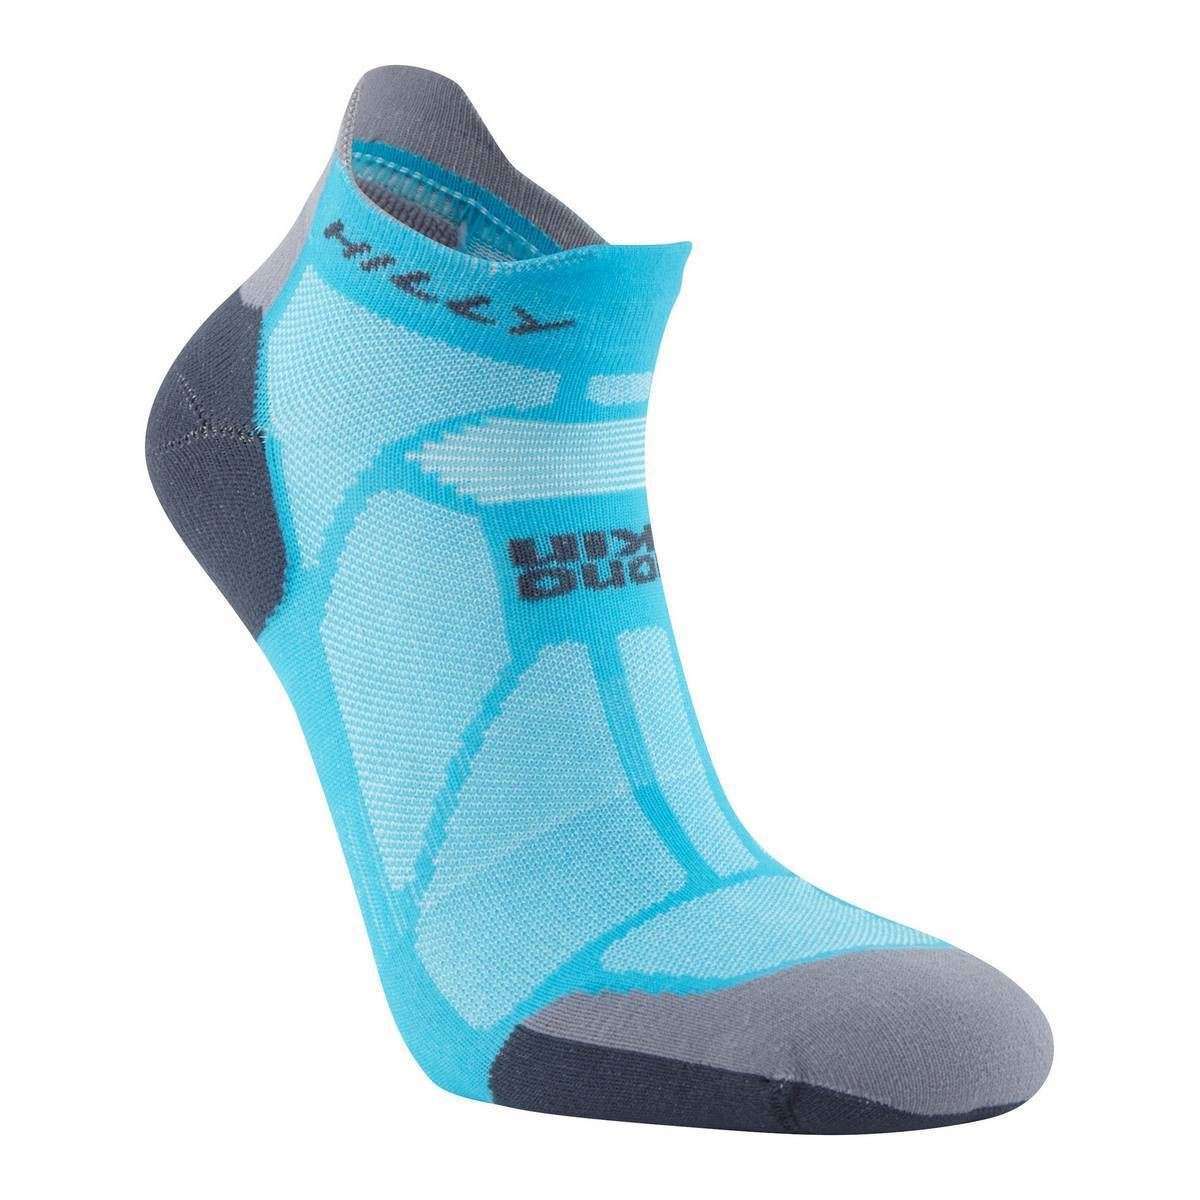 Hilly Marathon Fresh Socklets - Peacock Blue/Charcoal